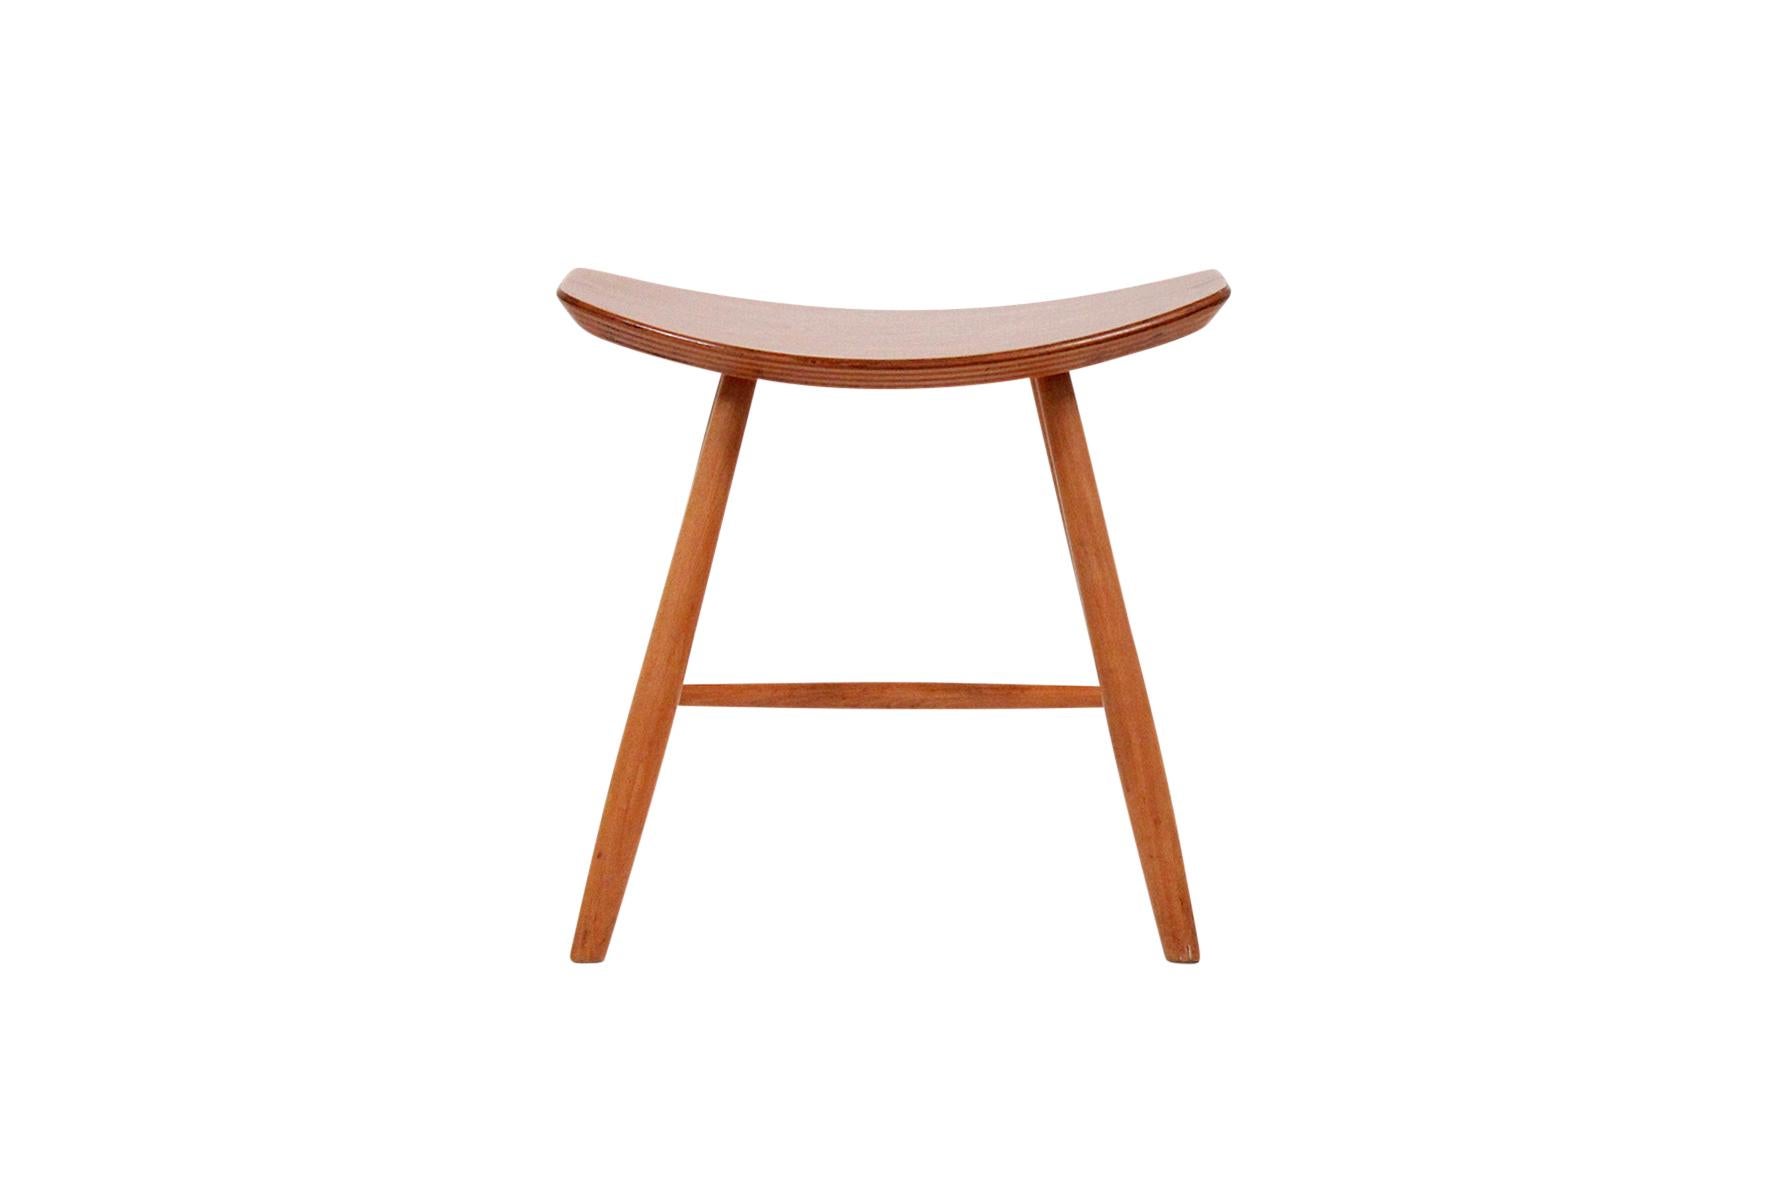 Birch stool designed by Ejvind Johansson and produced by FDB Mobler, Denmark. Model J63. Attractive and comfortable design.

____

We're offering our customers free domestic shipping on all items during the current health crisis. We will also offer